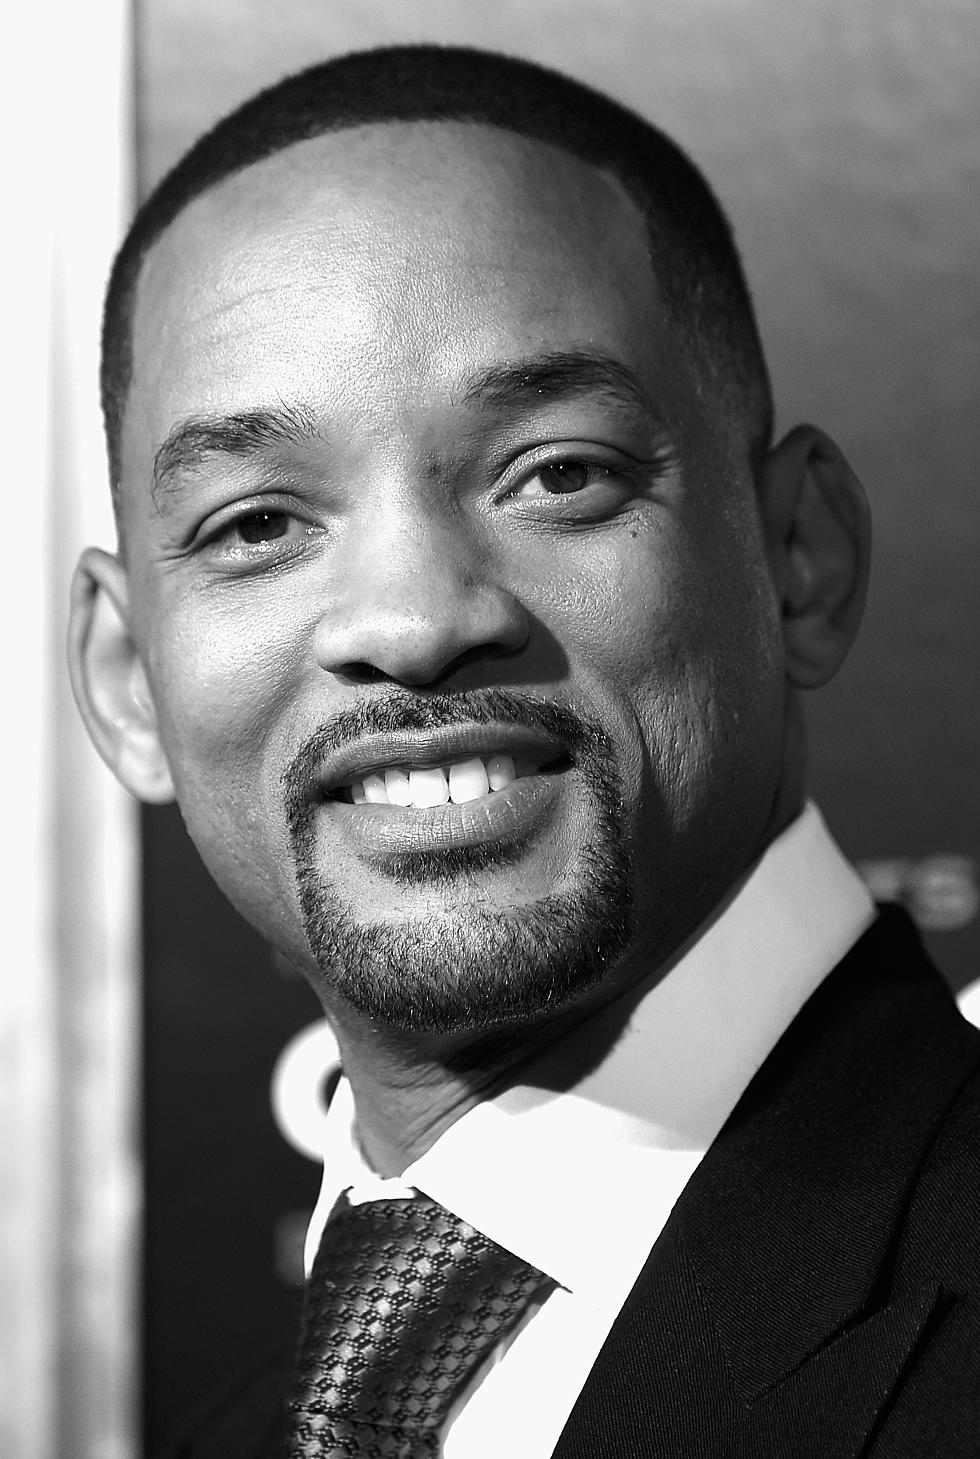 Will Smith For President?